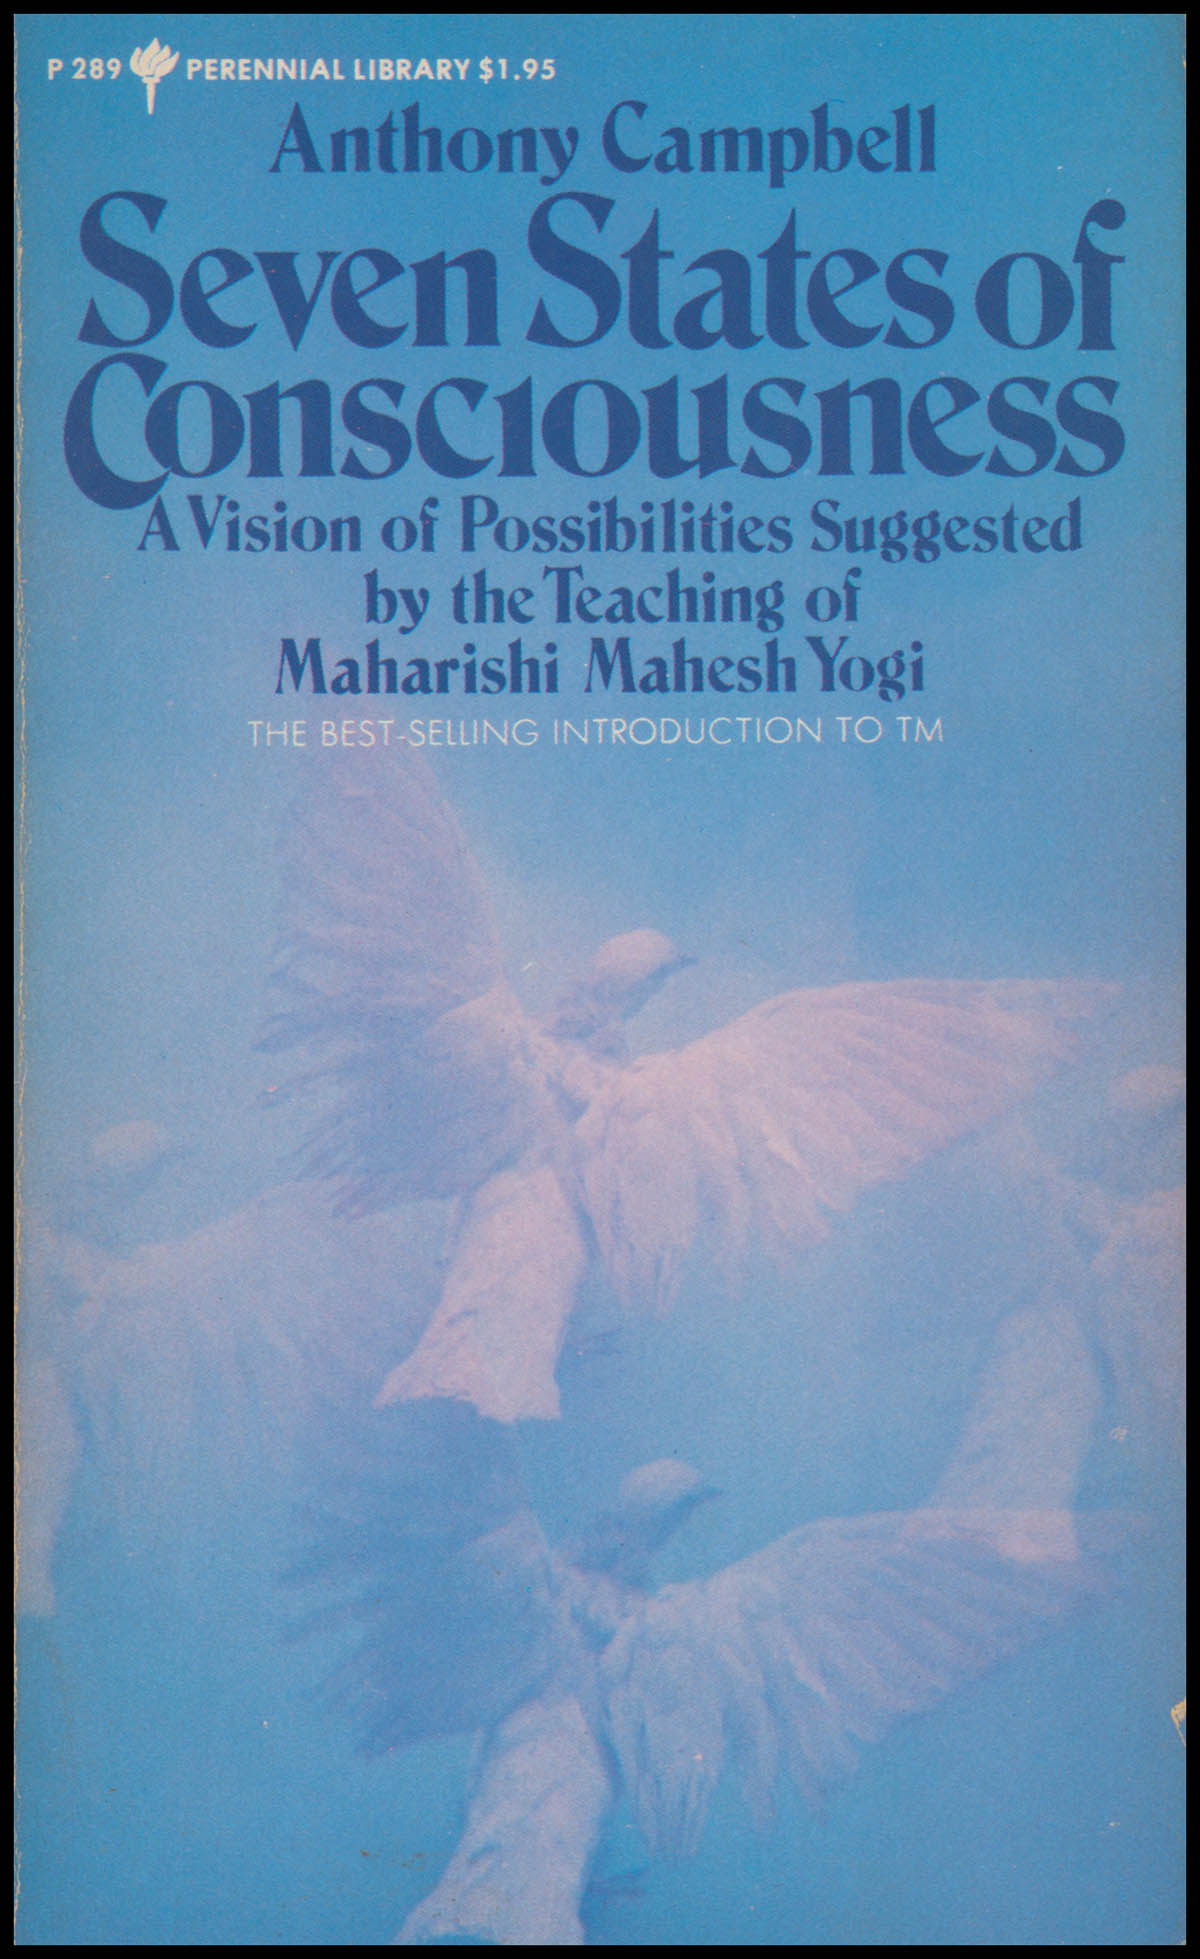 Campbell, Anthony - Seven States of Consciousness: A Vision of Possibilities Suggested by the Teaching of Maharishi Mahesh Yogi